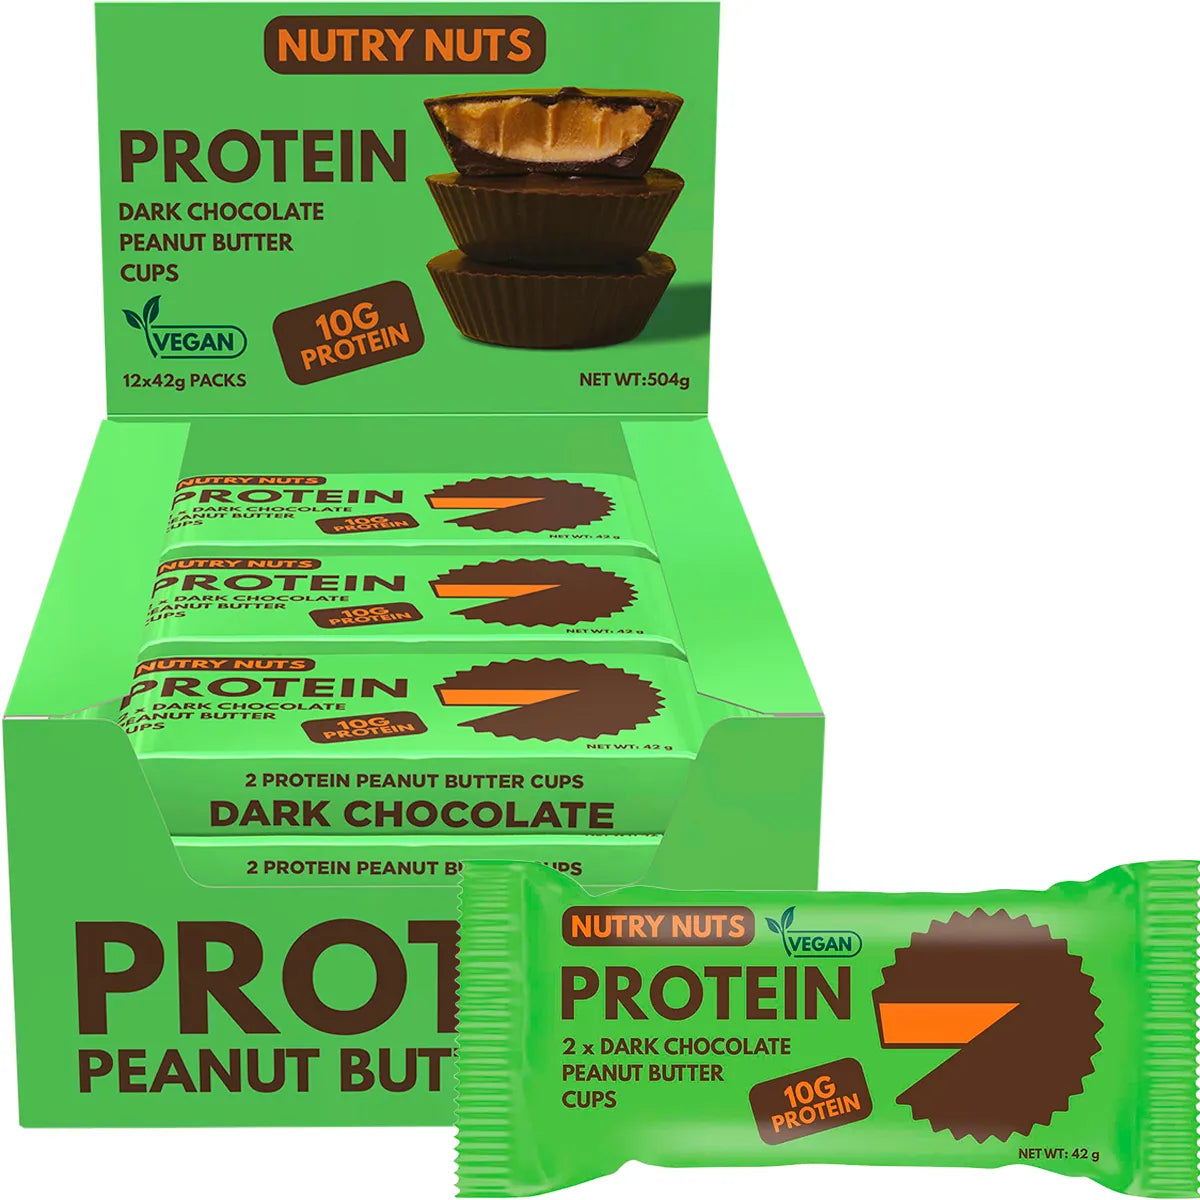 Nutry Nuts Protein Peanut Butter Cups Dark Chocolate 12x42g